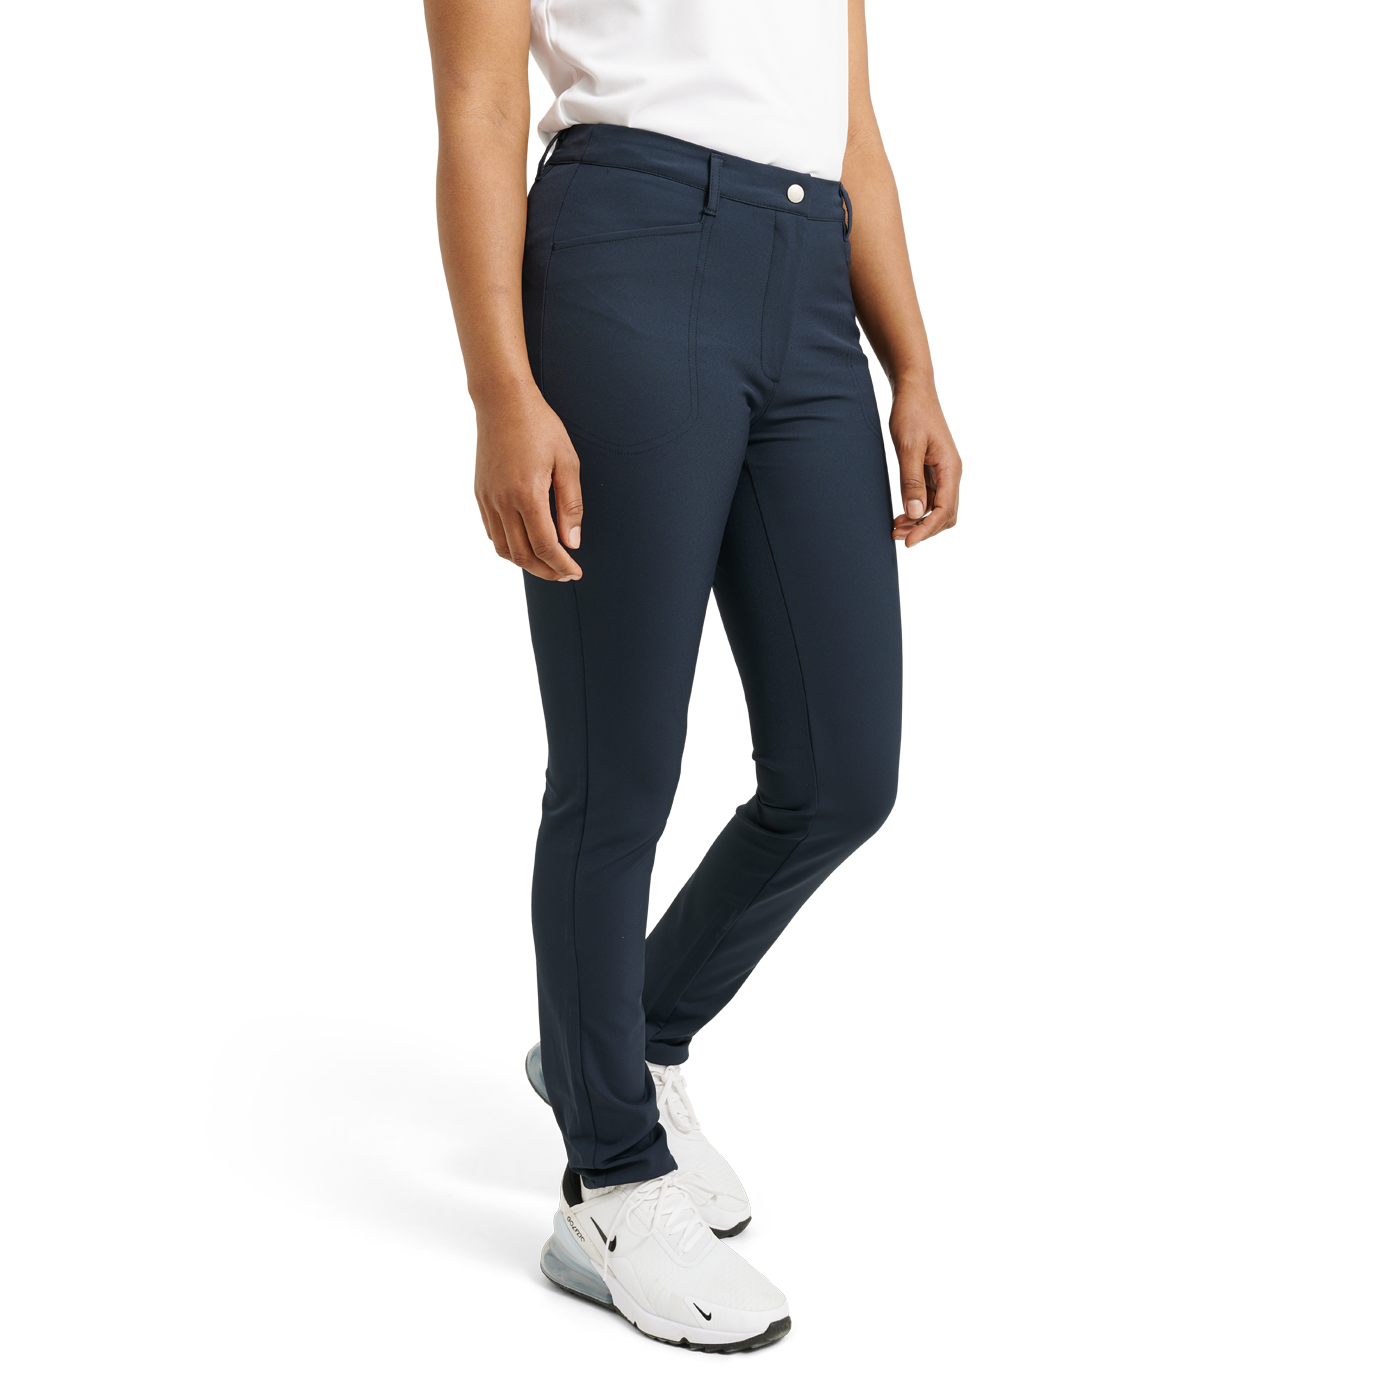 Elite trousers - navy Trousers - WOMEN | Golf clothing | Abacus